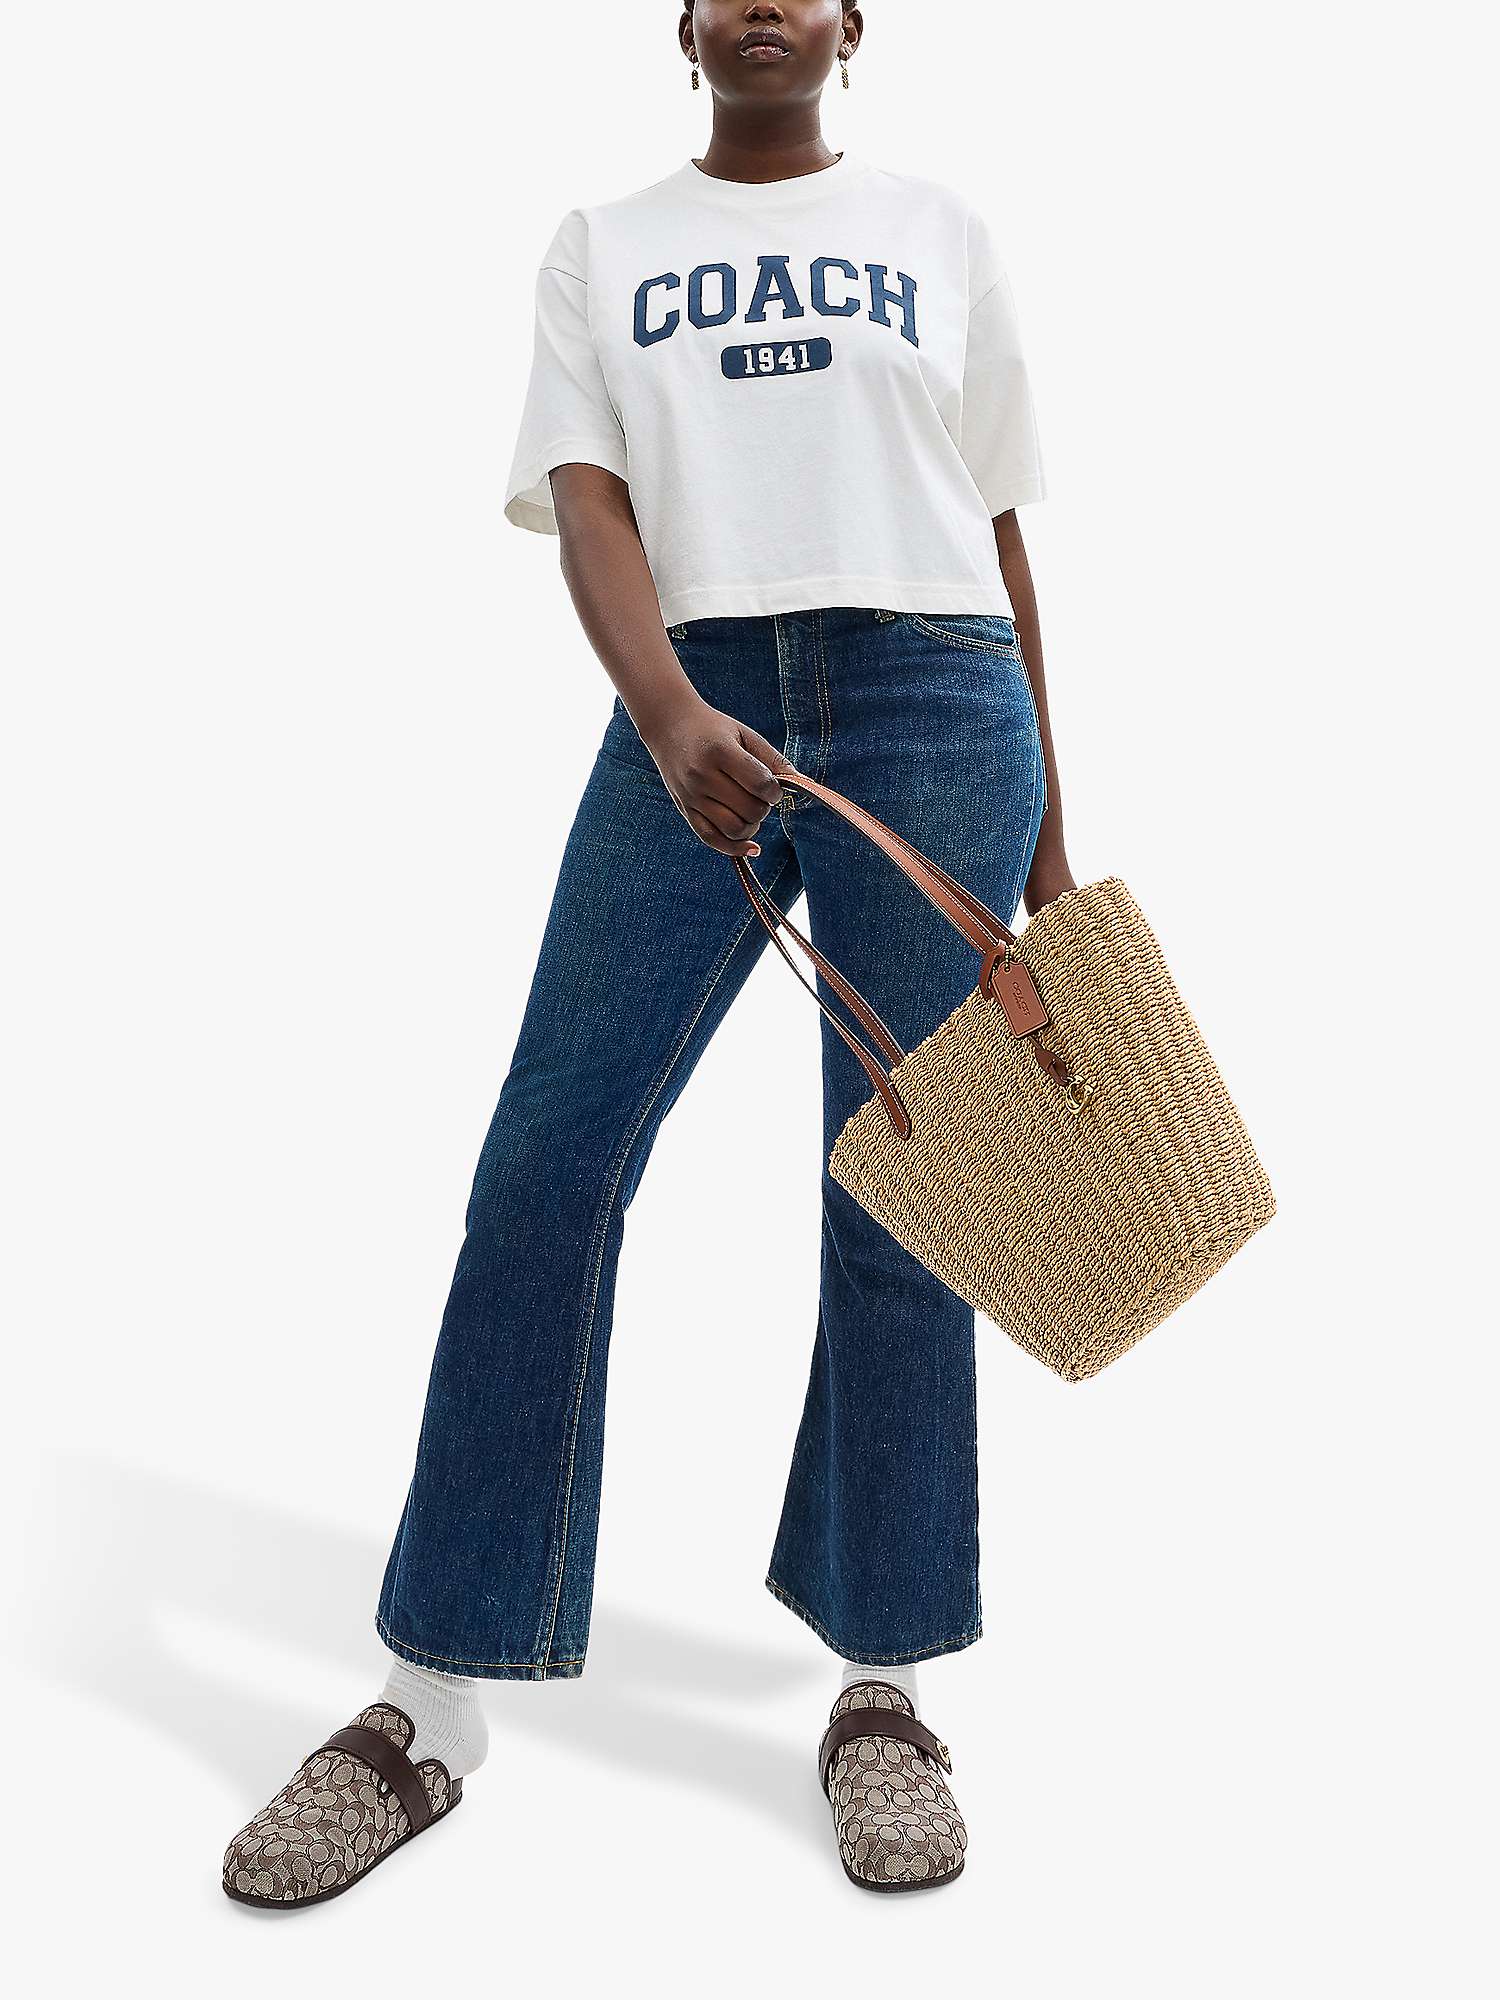 Buy Coach Small Straw Tote Bag Online at johnlewis.com